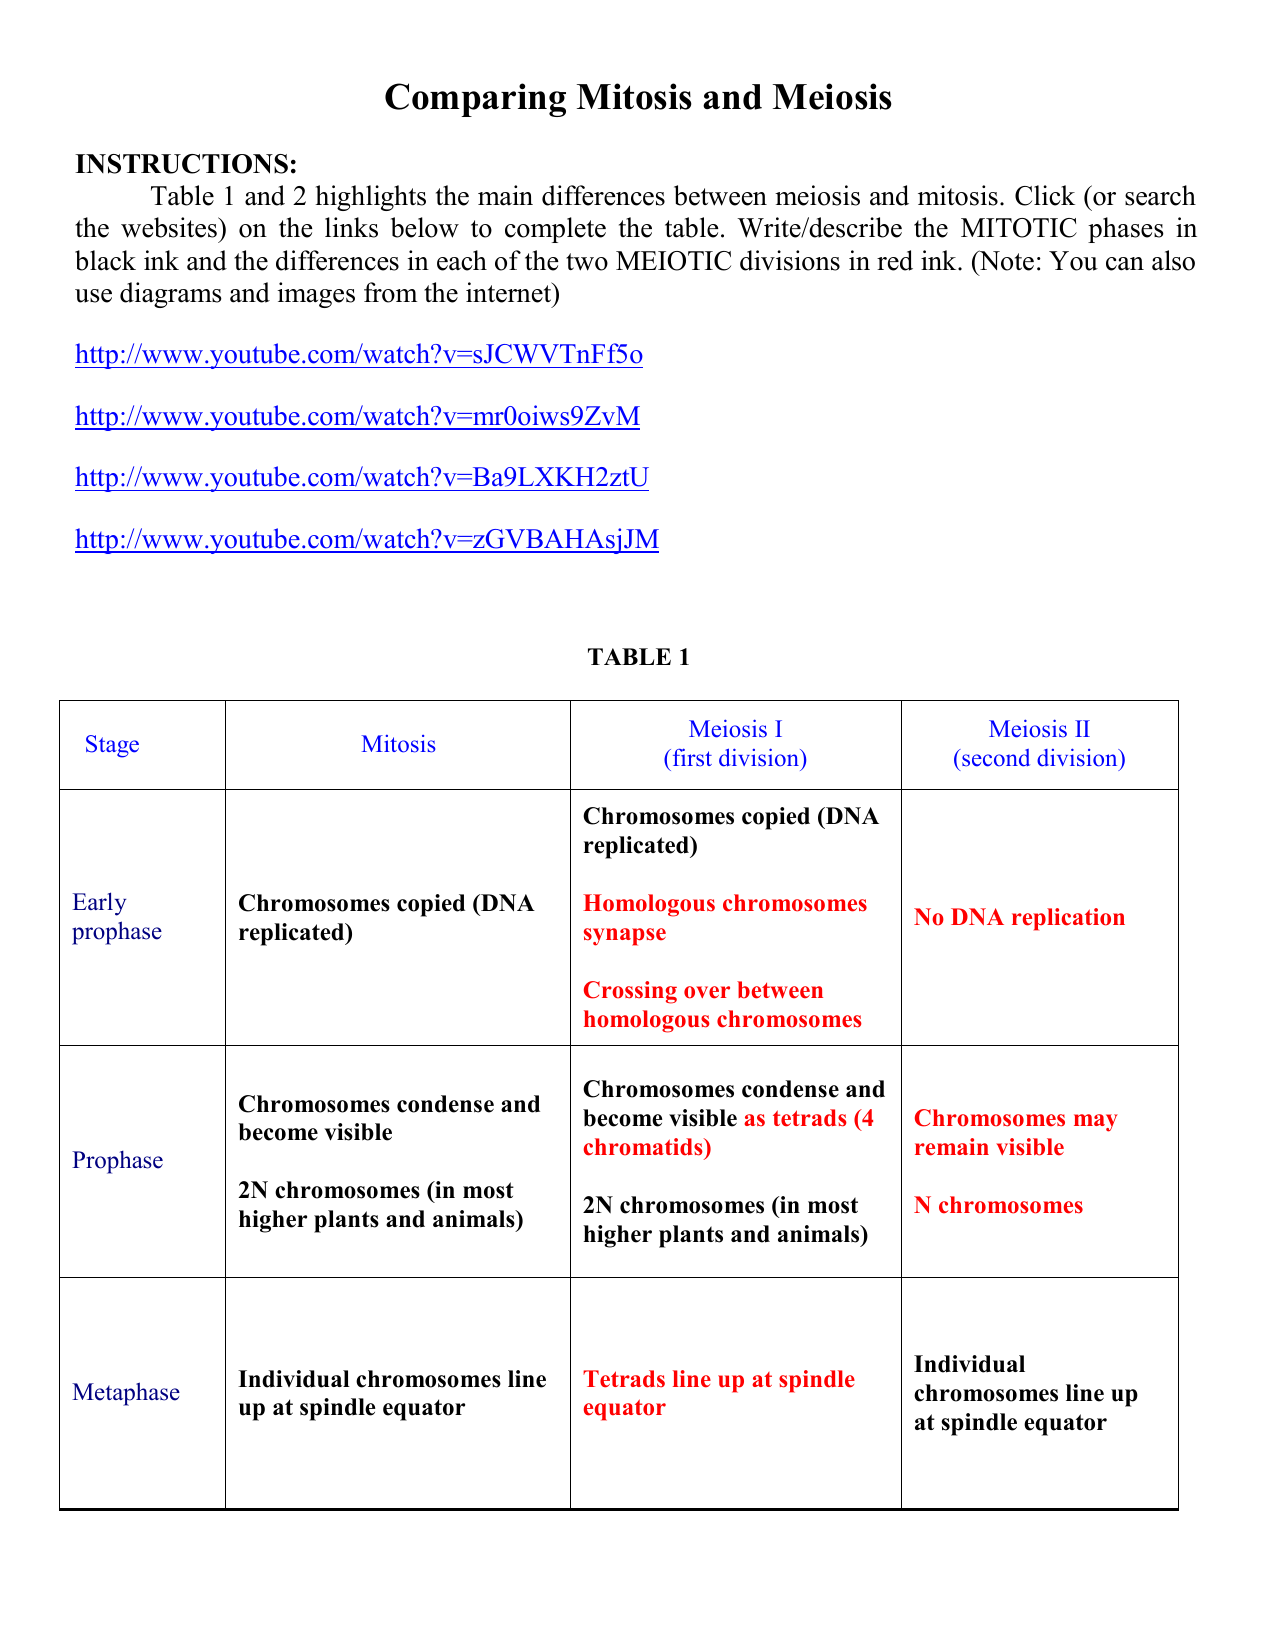 mitosis-and-meiosis-webquest-key-mendel-and-meiosis-worksheet-answers-amp-440-x-320-440-x-320